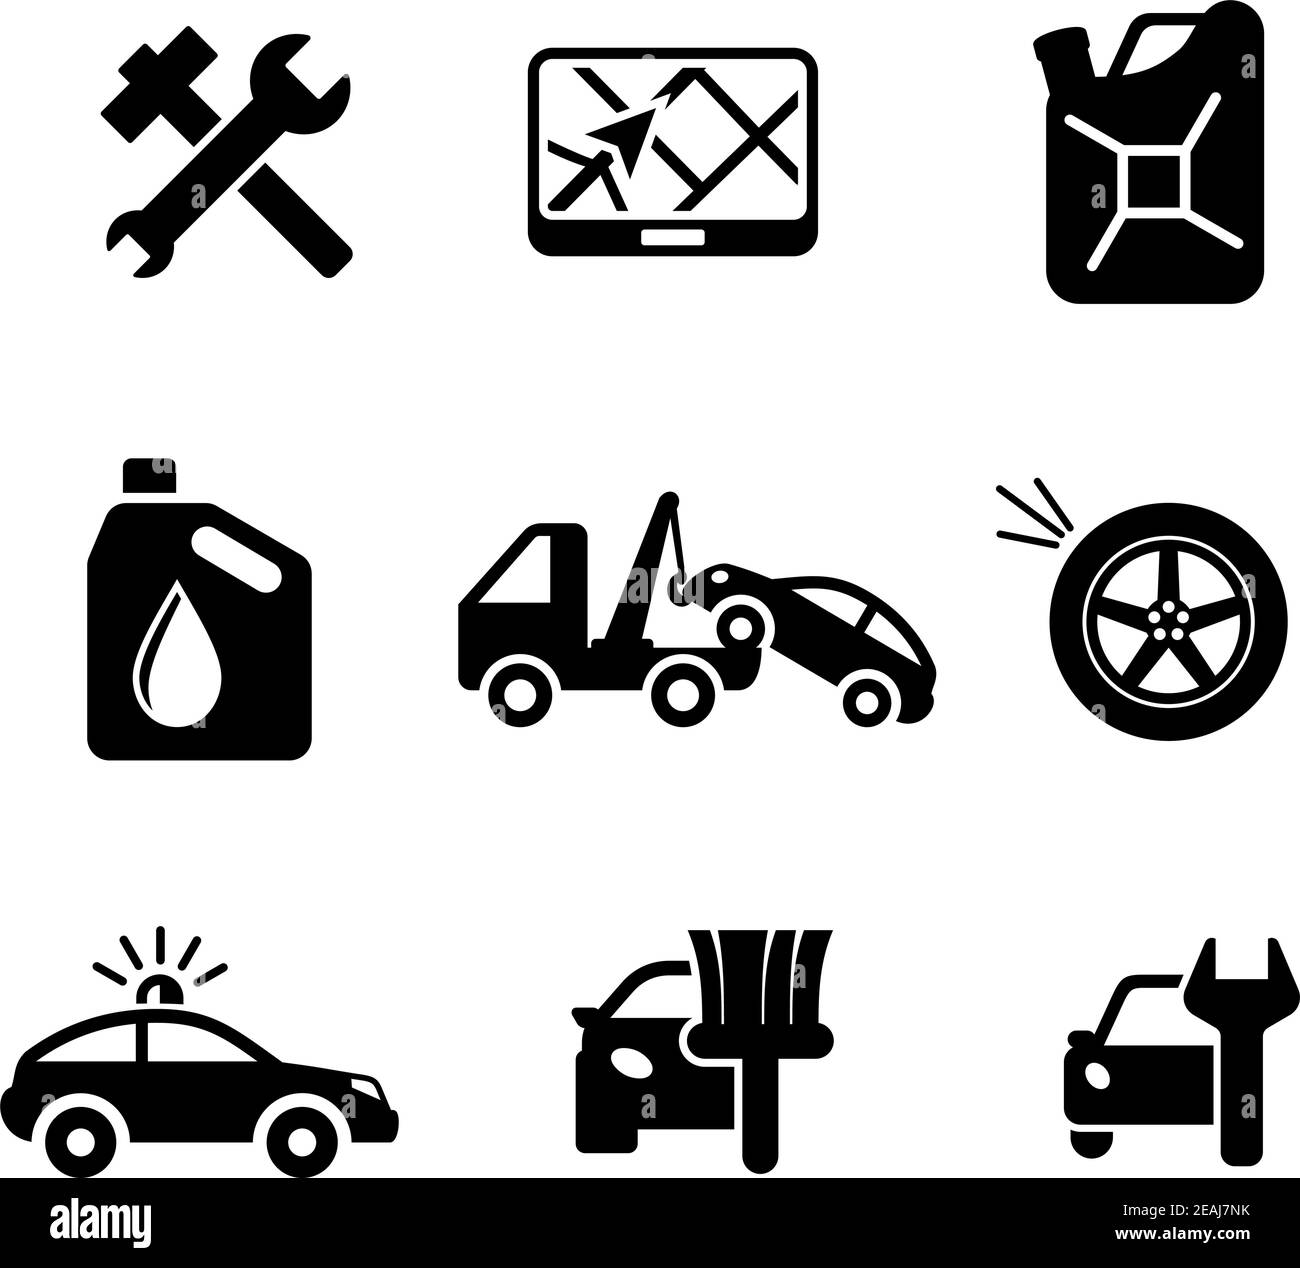 Set of car service and automobile icons including tools, road sign, oil and petrol containers, tow truck, wheel, tyre, jerry can, police, car wash and Stock Vector